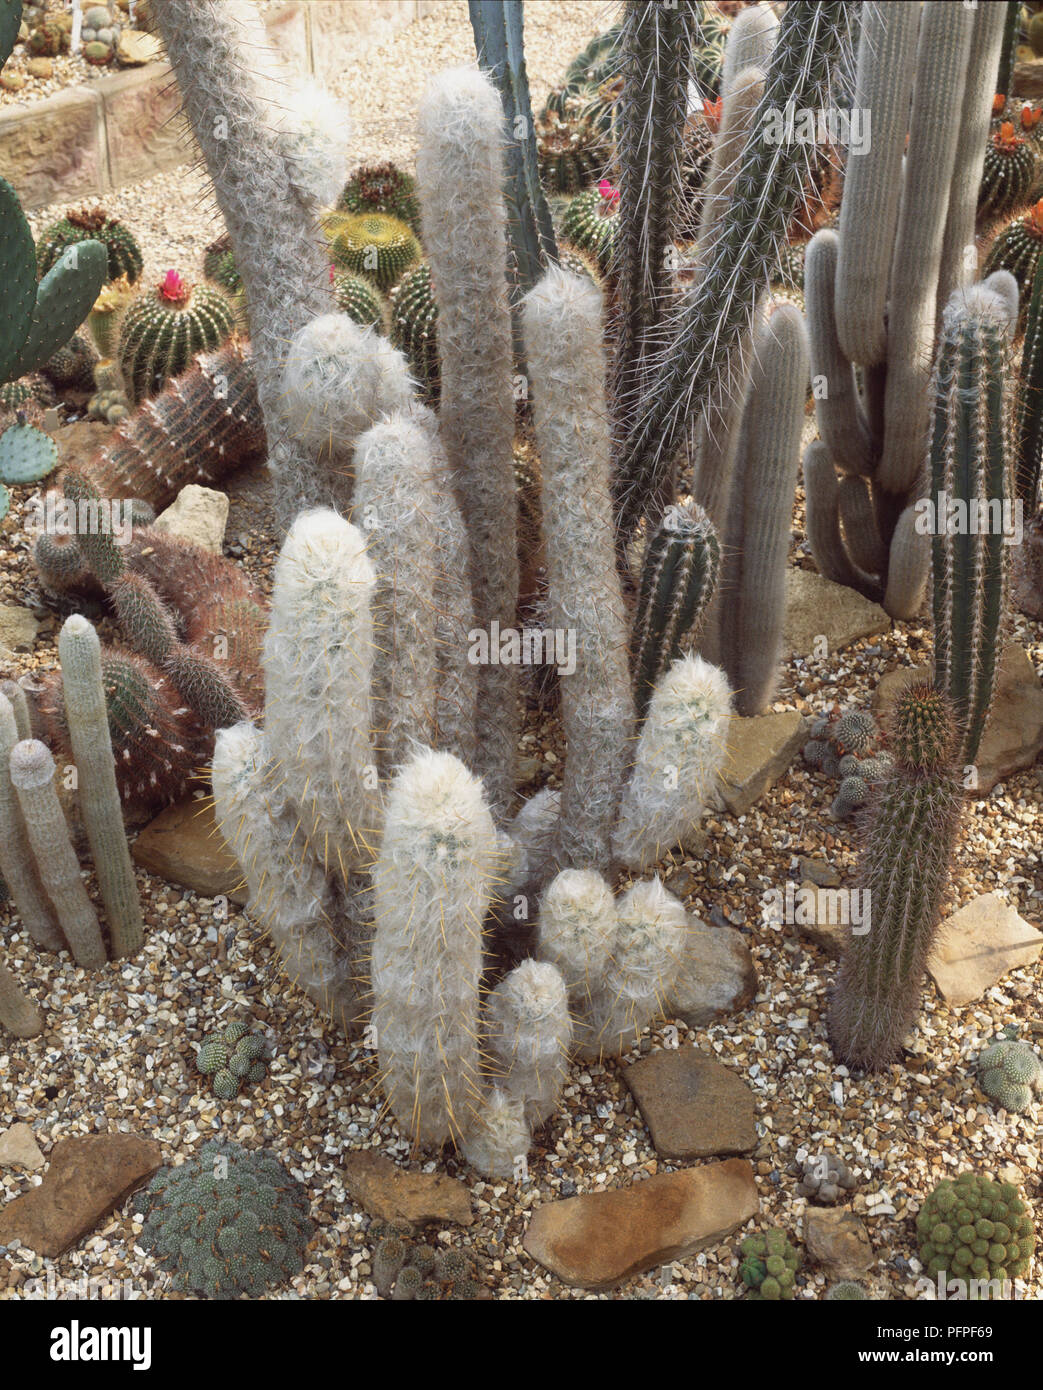 Oreocereus celsianus (Old Man of the Mountain), wool-covered Andean cactus Stock Photo